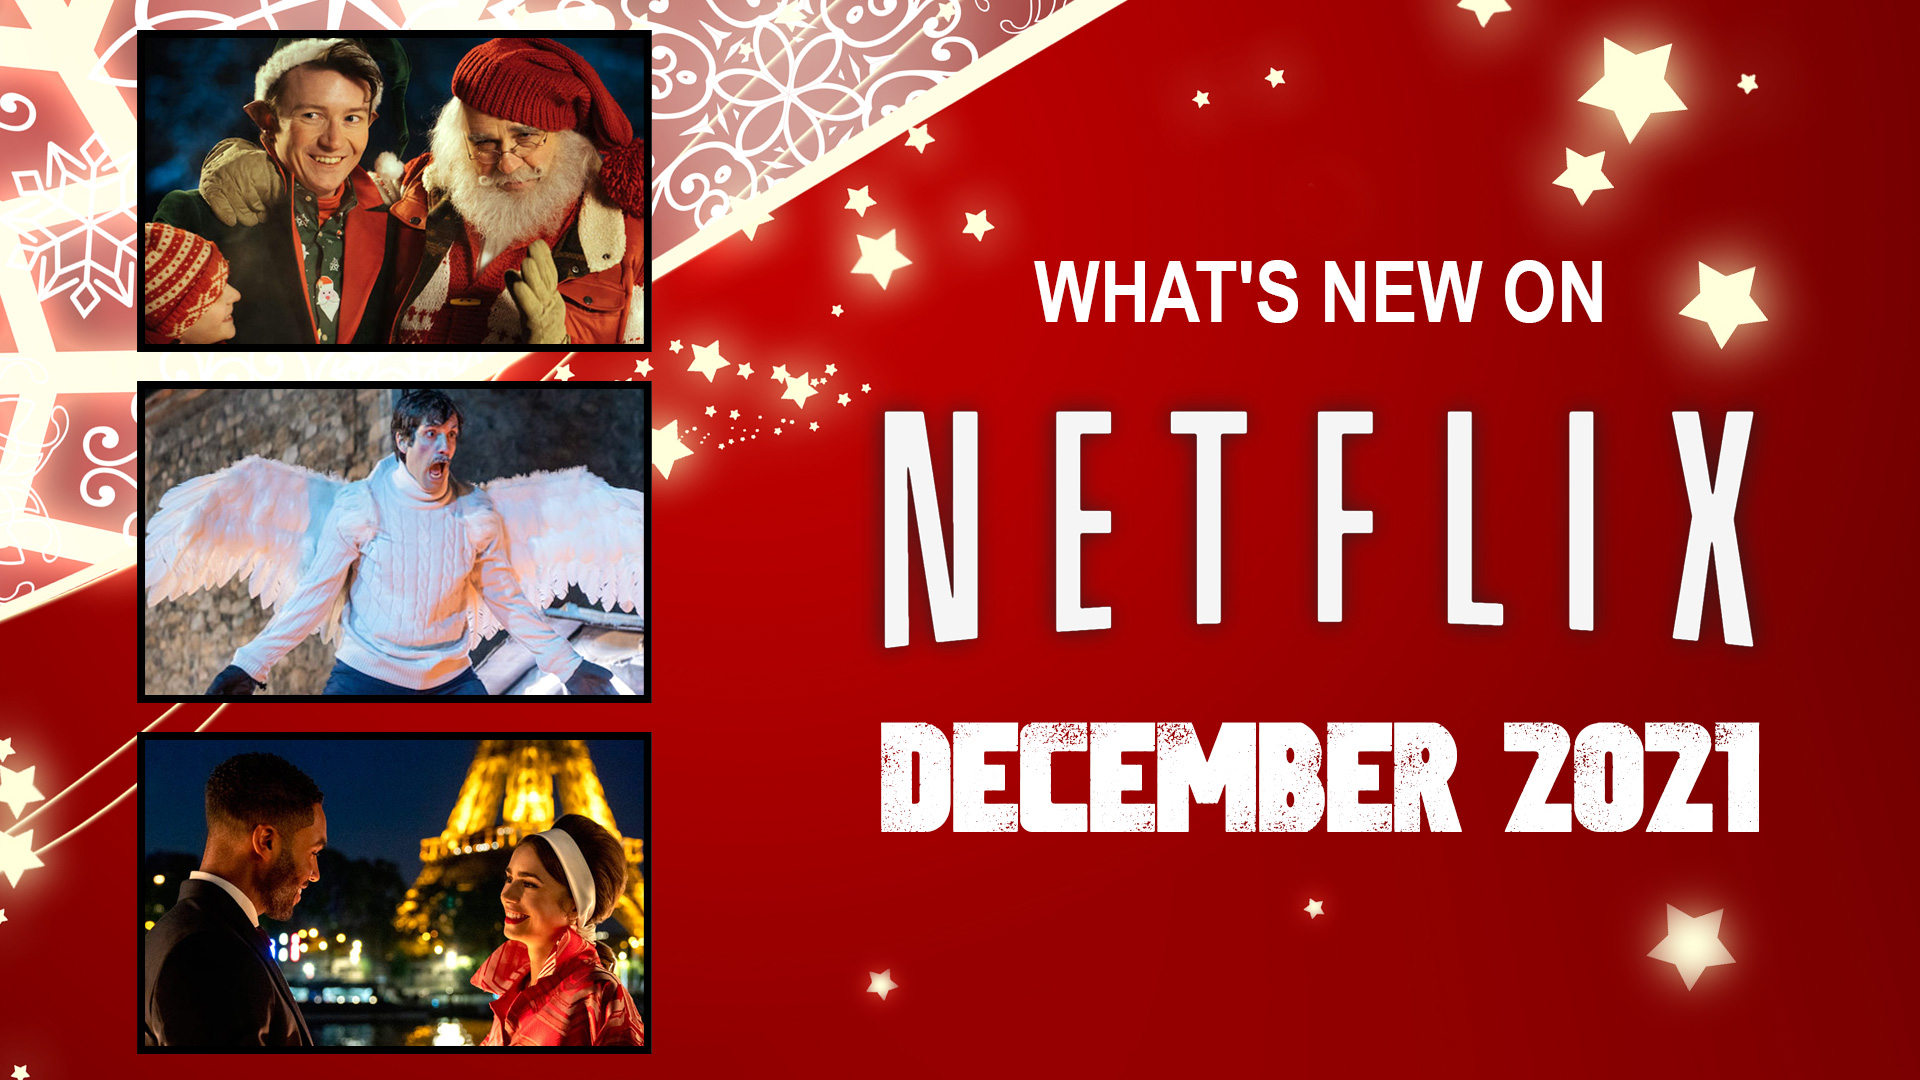 What's New on Netflix December 2021